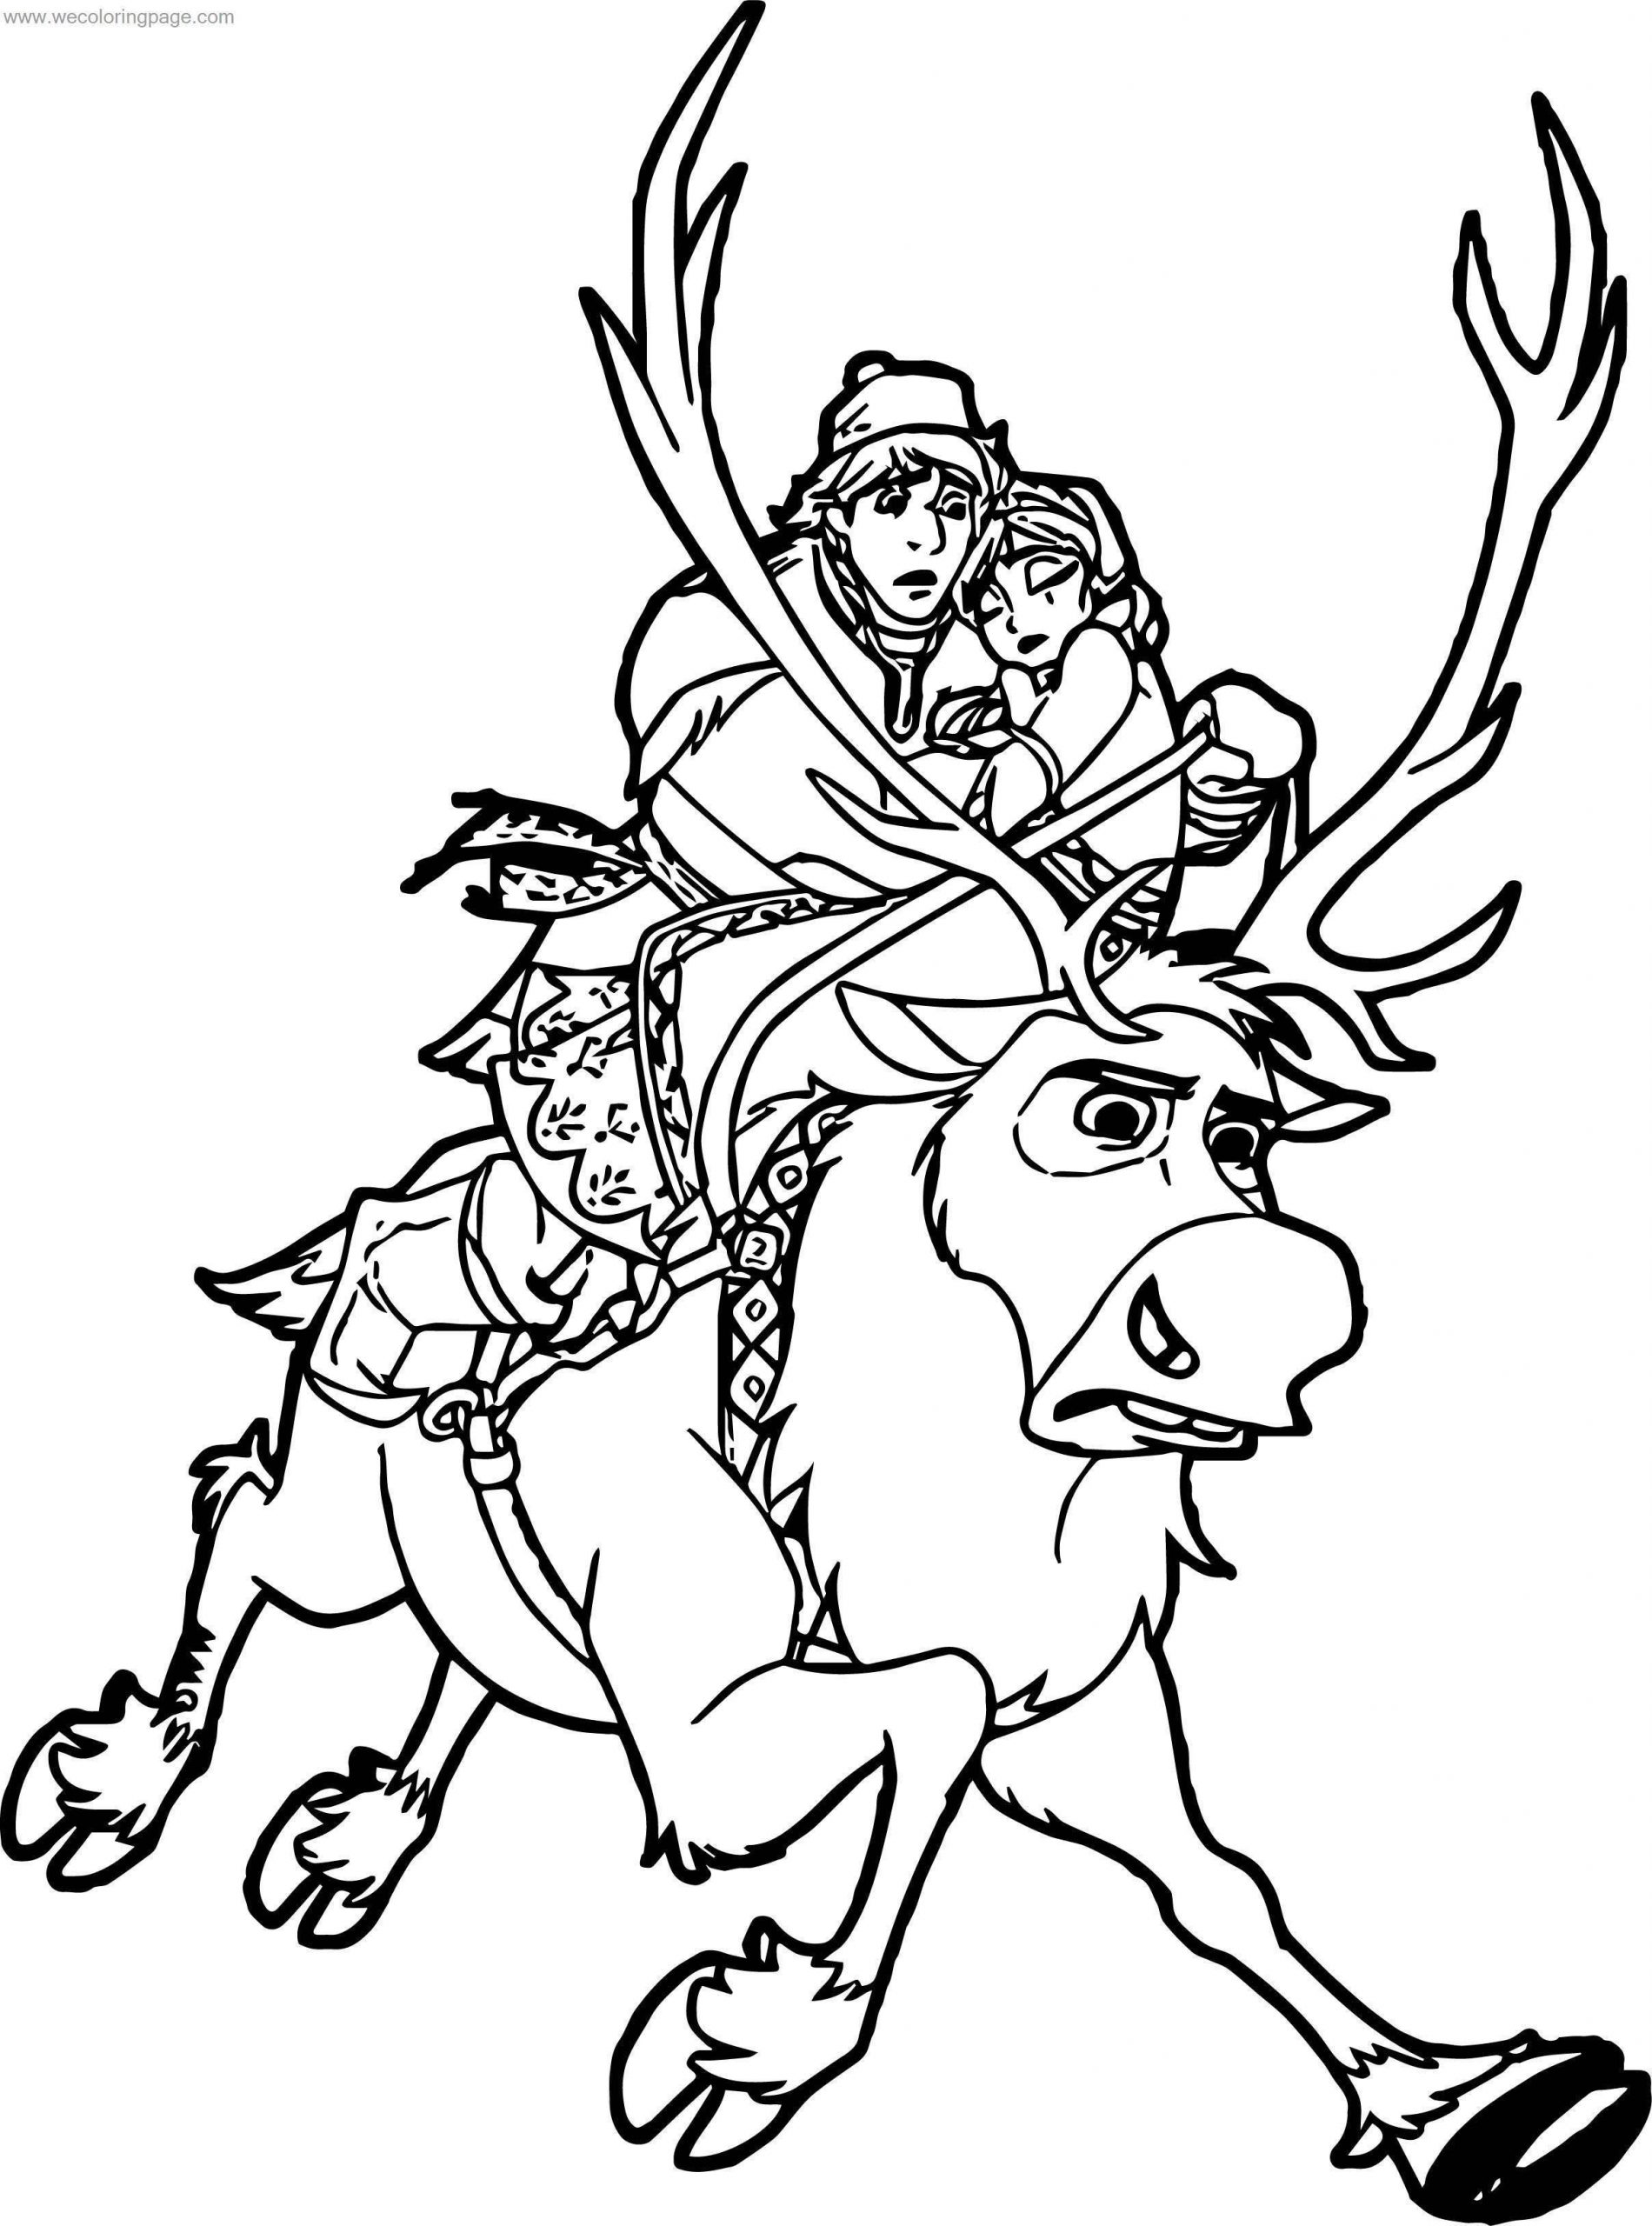 Coloring Pages : 44 Stunning Sven Frozen Coloring Pages ...